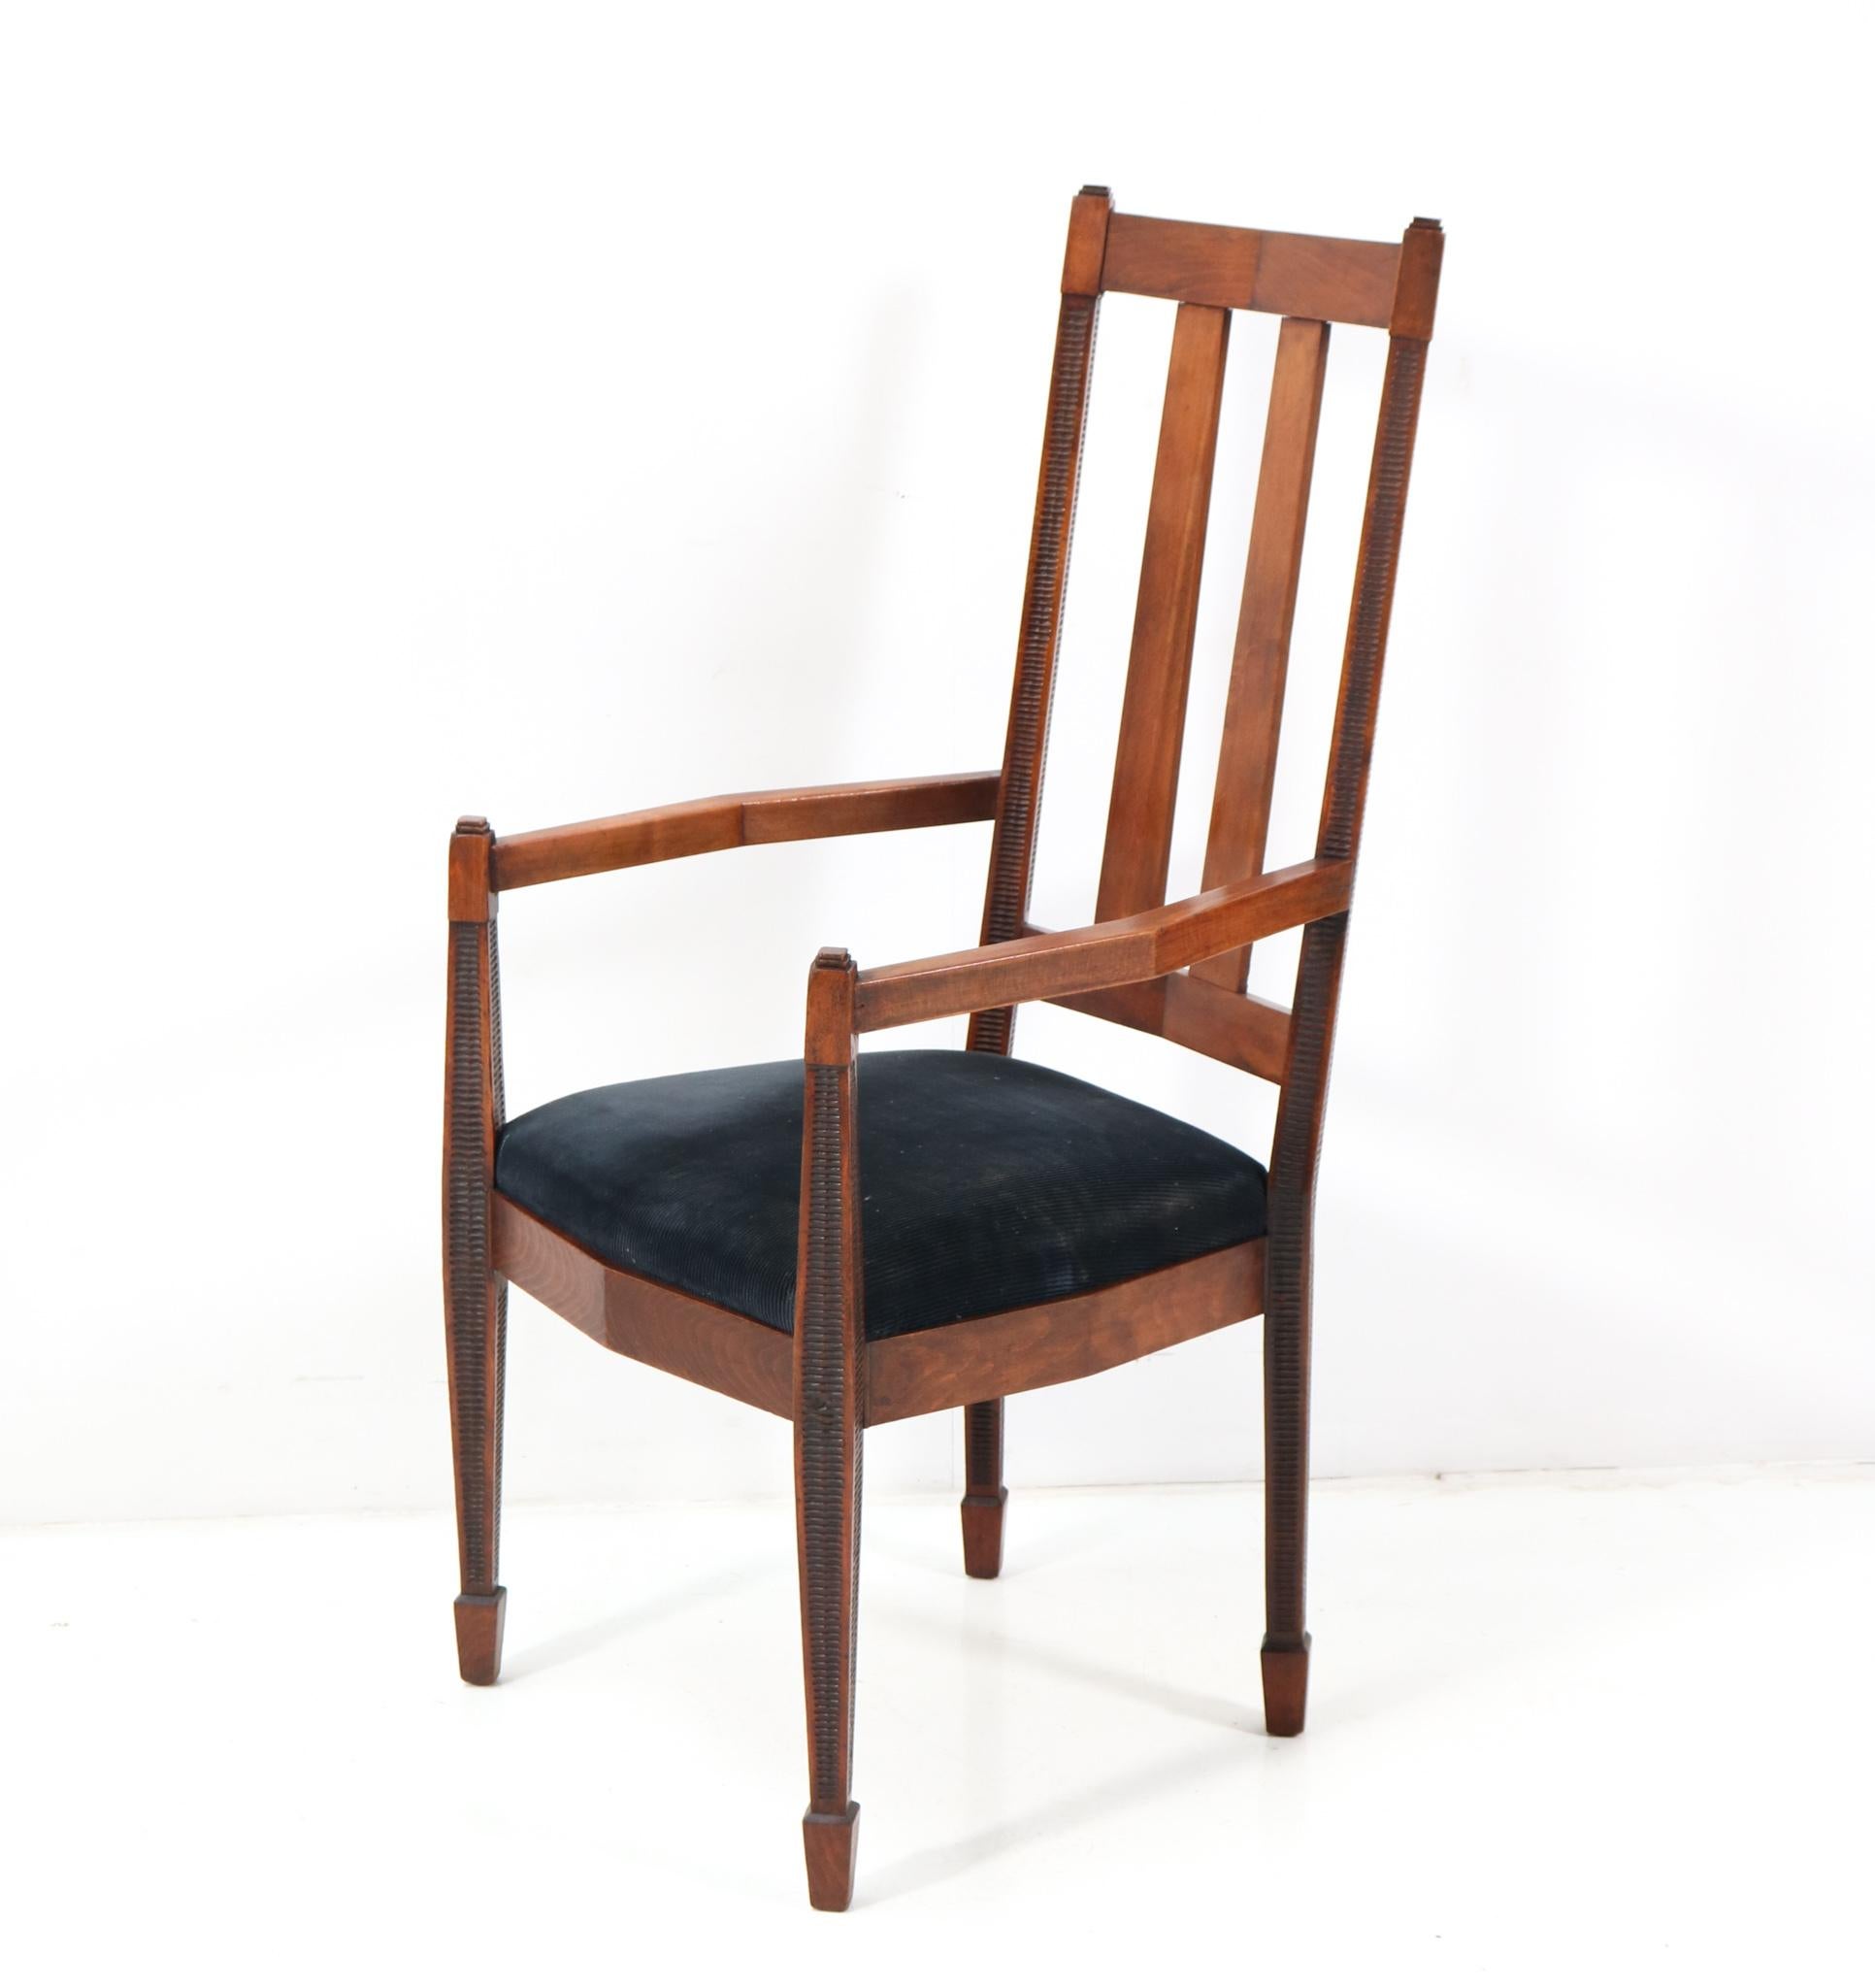 Magnificent and rare set of five Art Deco Amsterdamse School dining room chairs and one matching armchair.
Striking Dutch design from the 1920s.
Solid stained beech frames with black Manchester corduroy fabric.
This wonderful set of five Art Deco